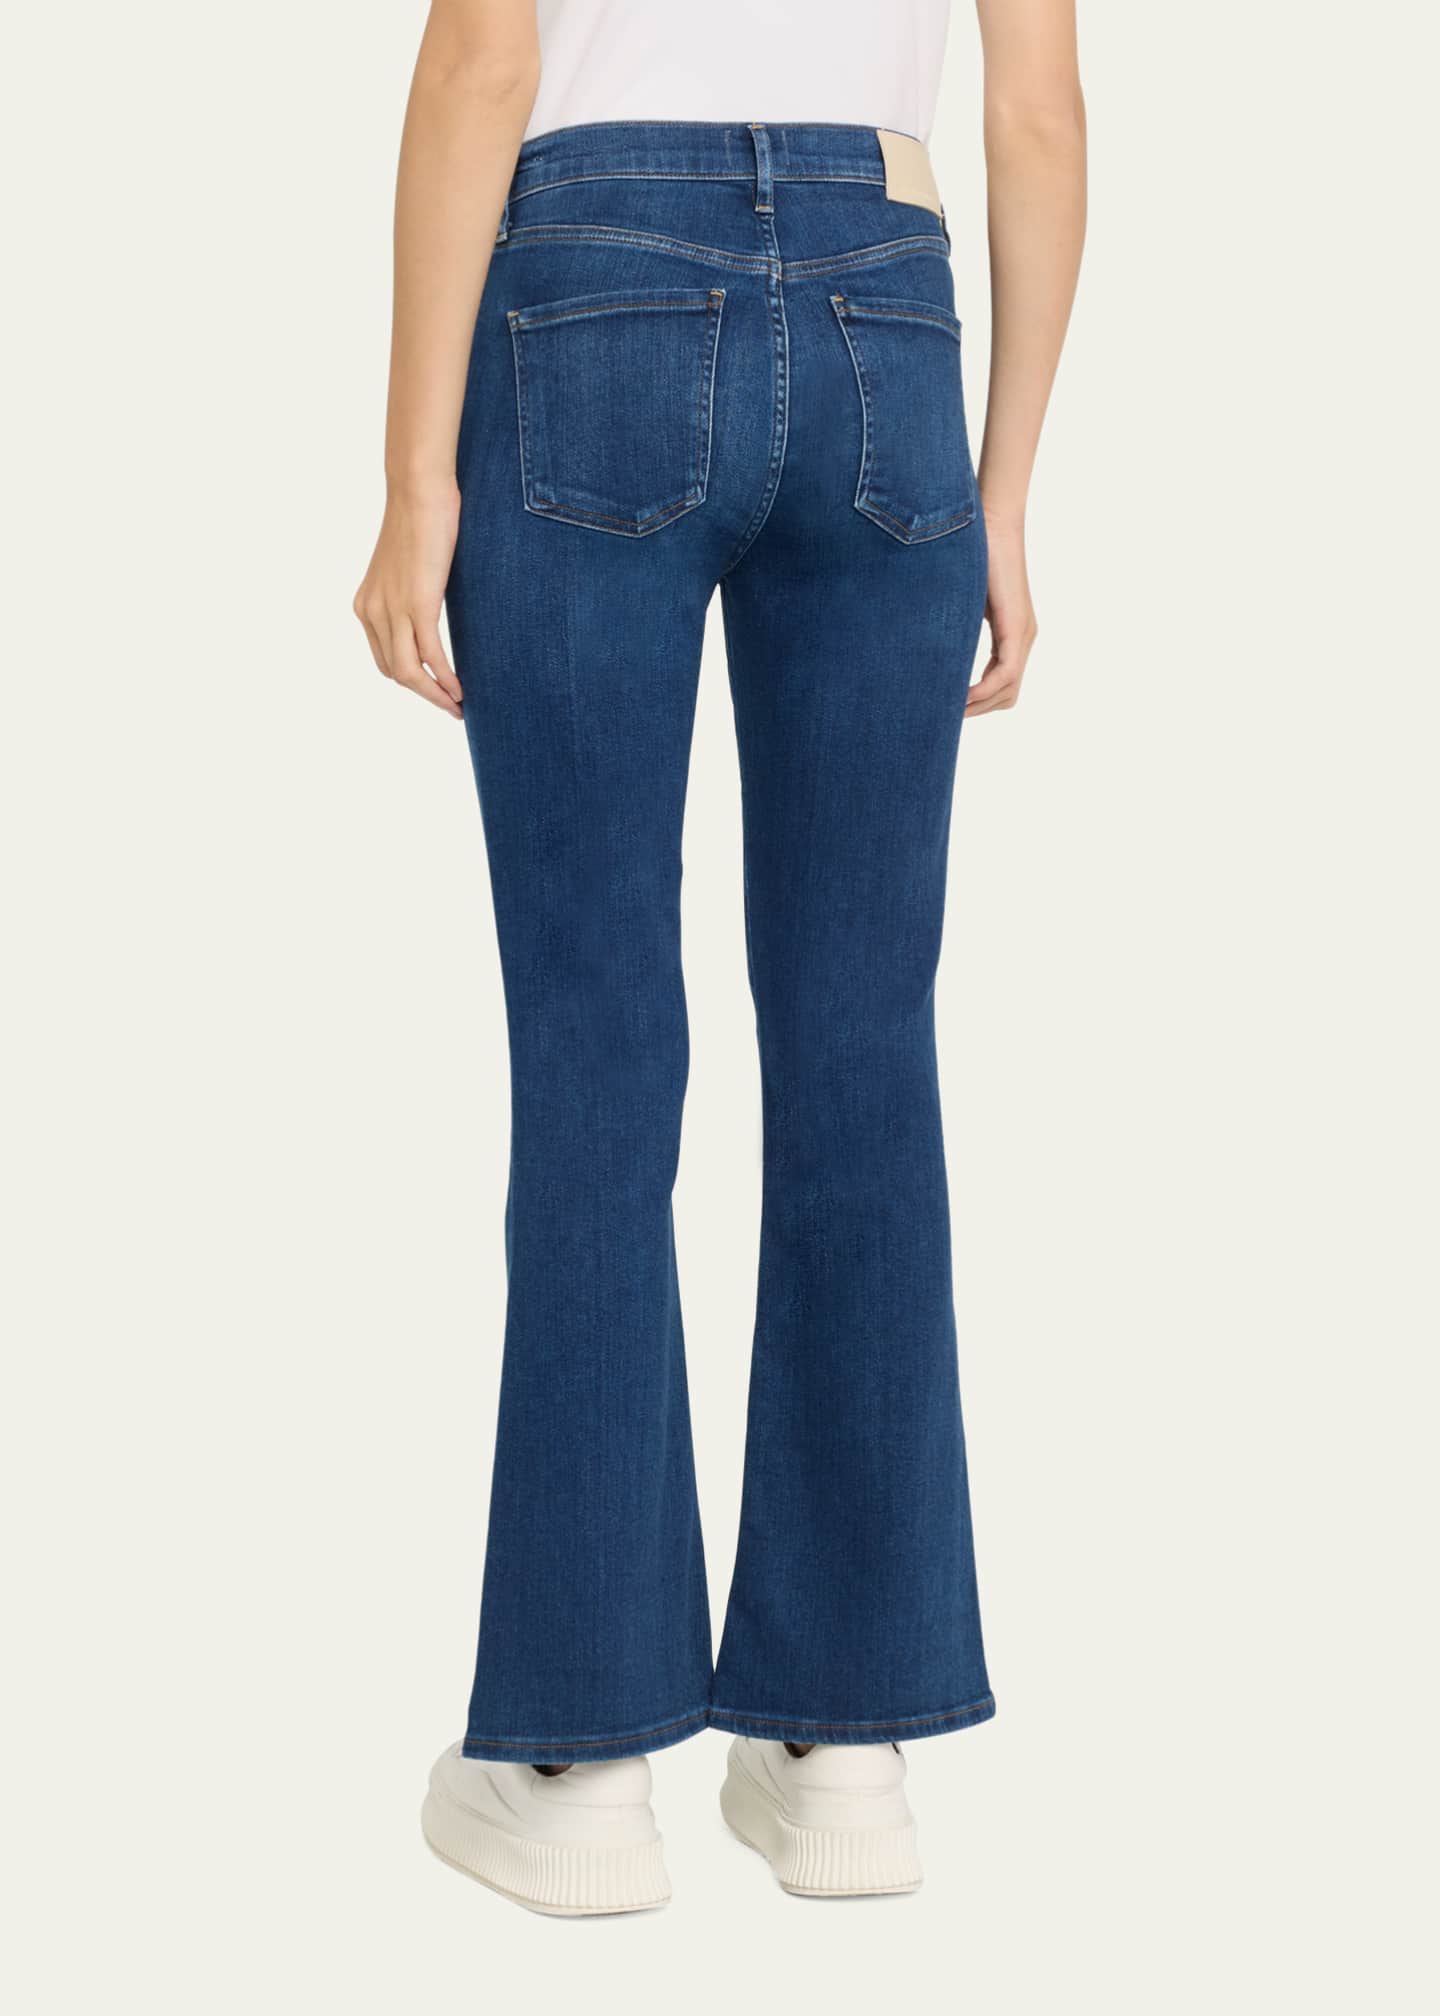 Citizens of Humanity Ayla Baggy Cuffed Cropped Jeans - Bergdorf Goodman